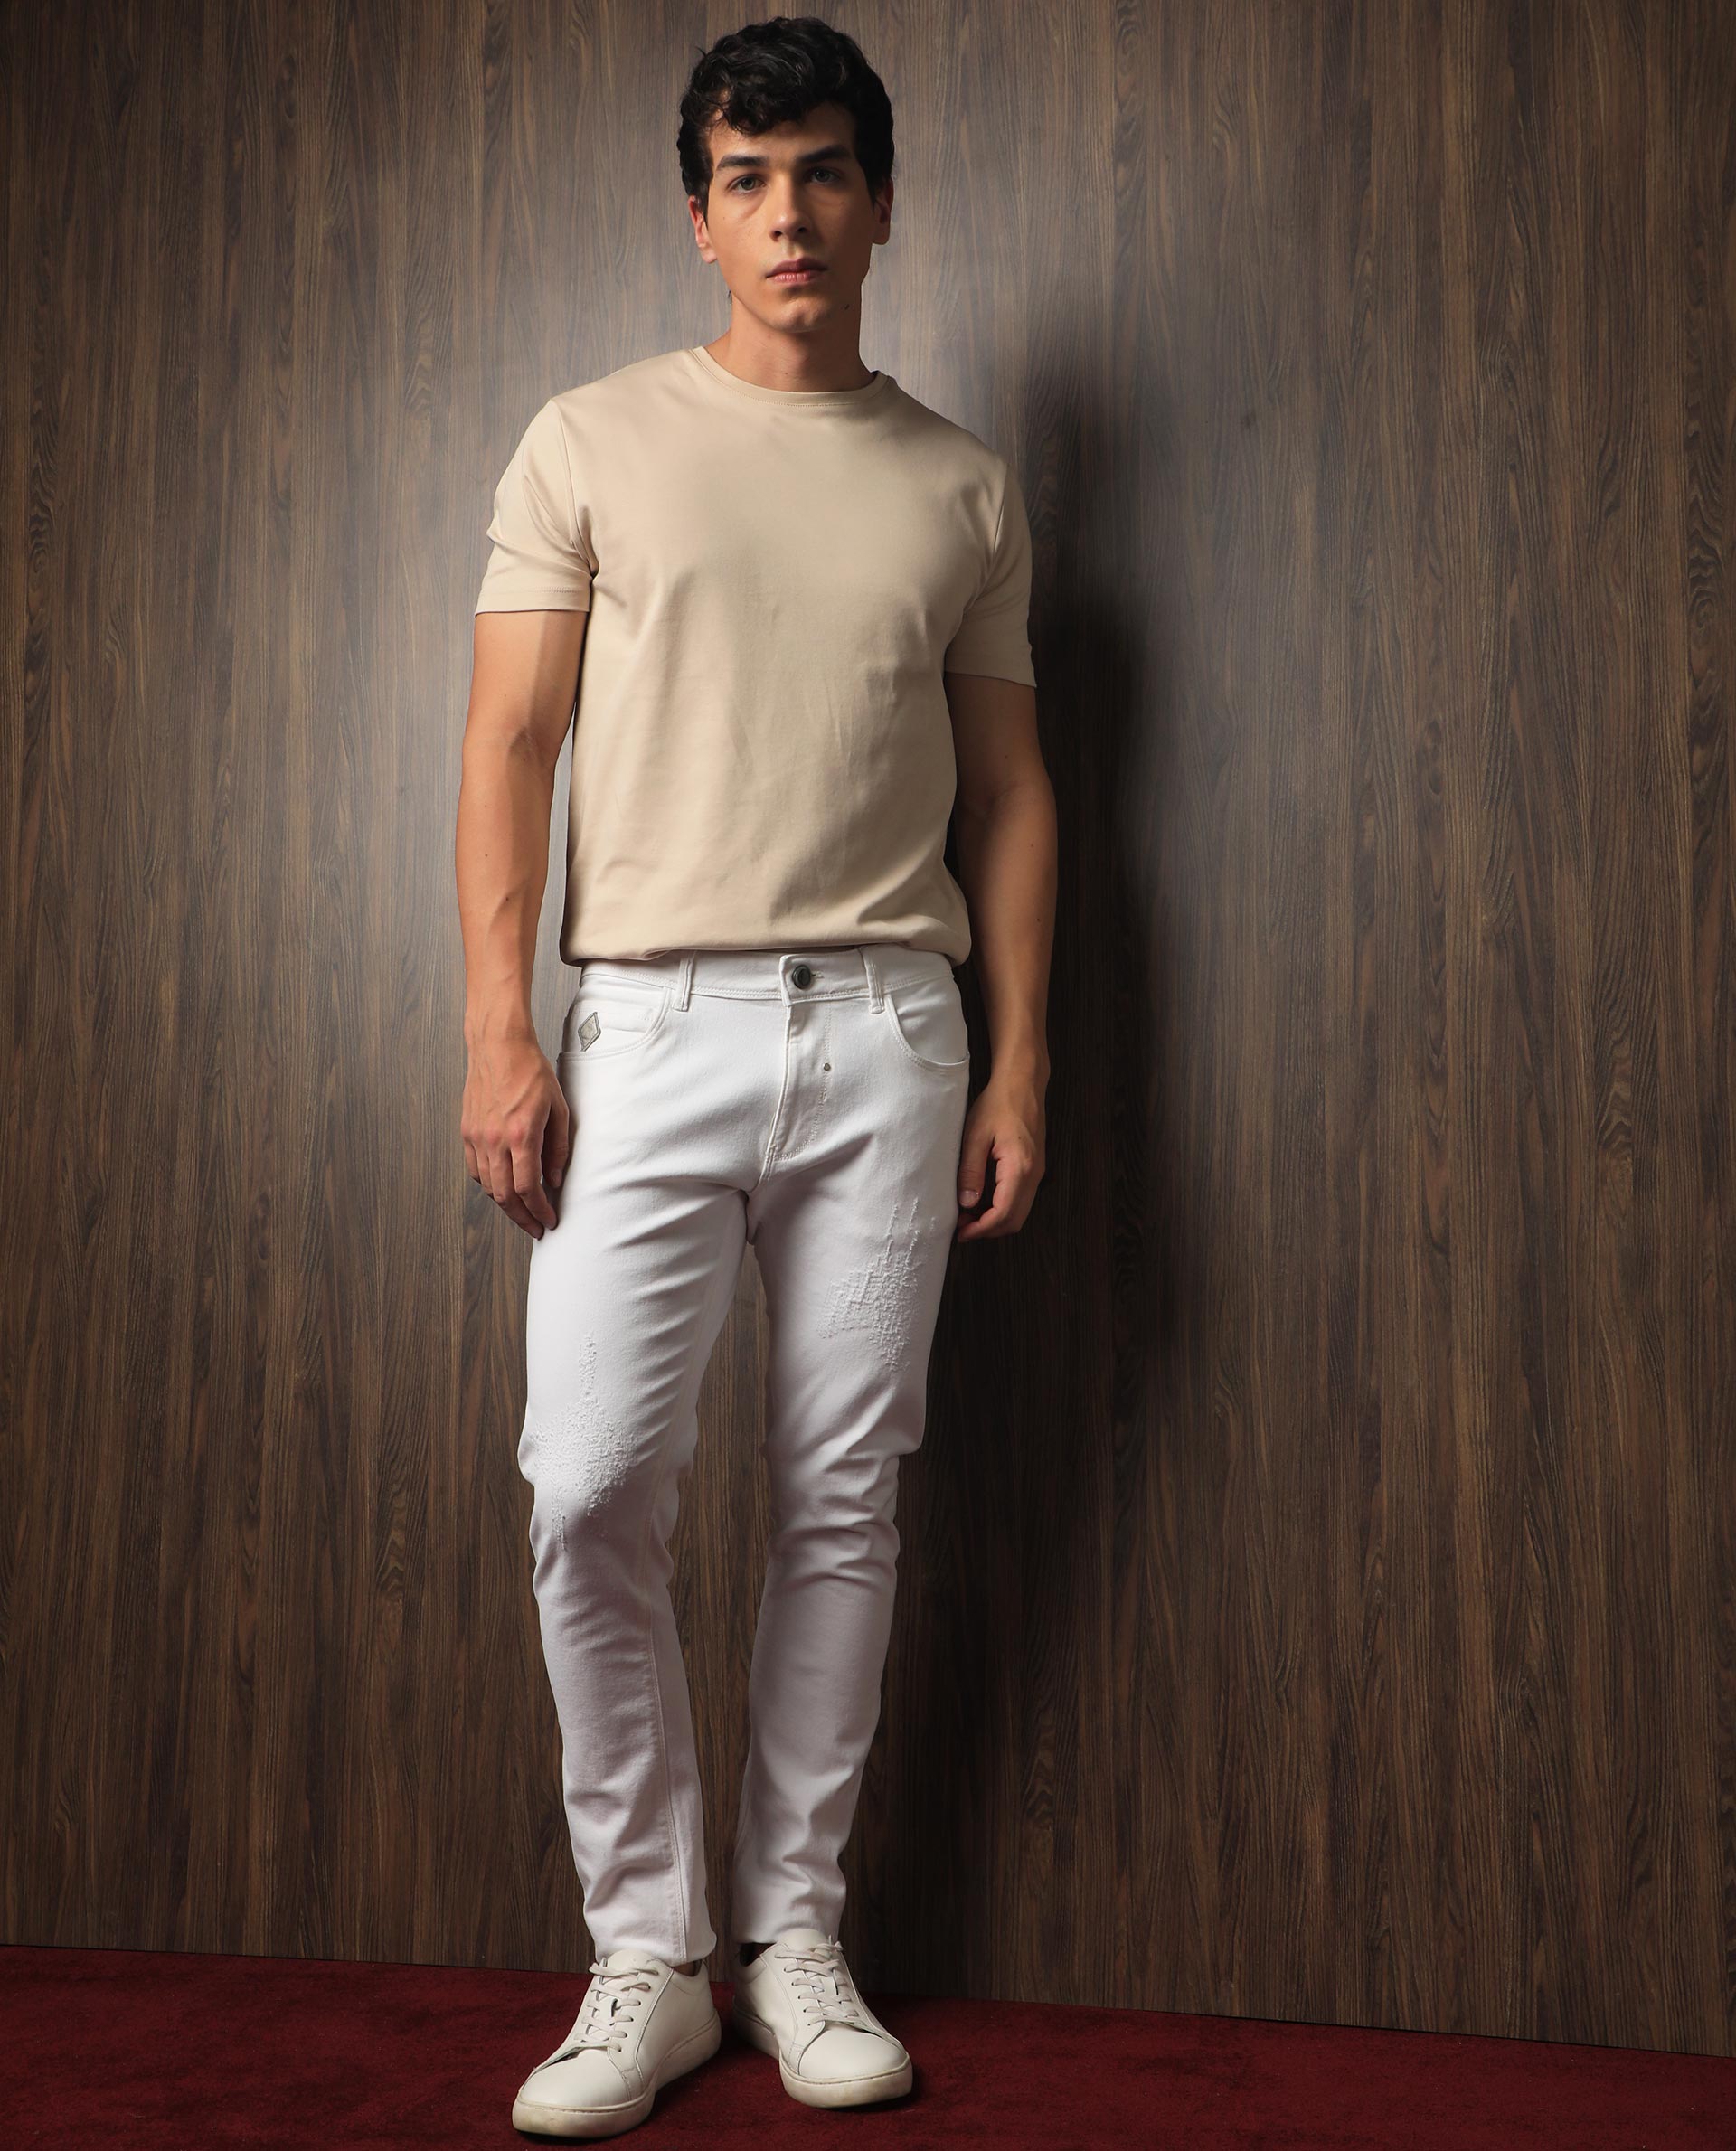 Men's Straight Jeans: Distressed & Stretch Fit Jeans | Lucky Brand